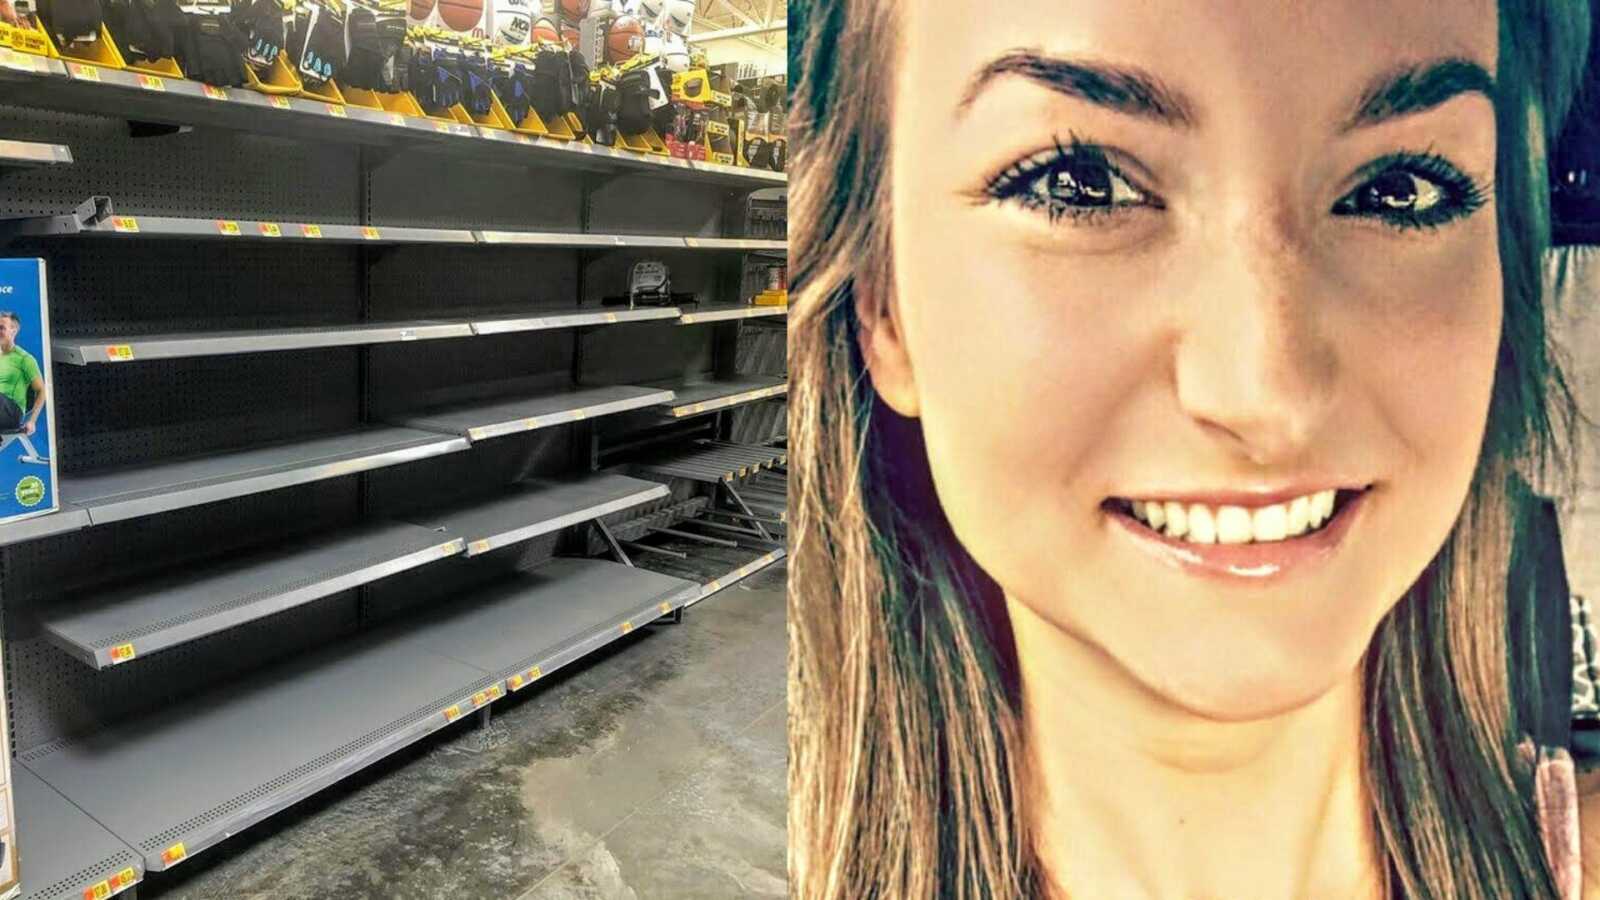 empty shelves at walmart and woman smiling in car